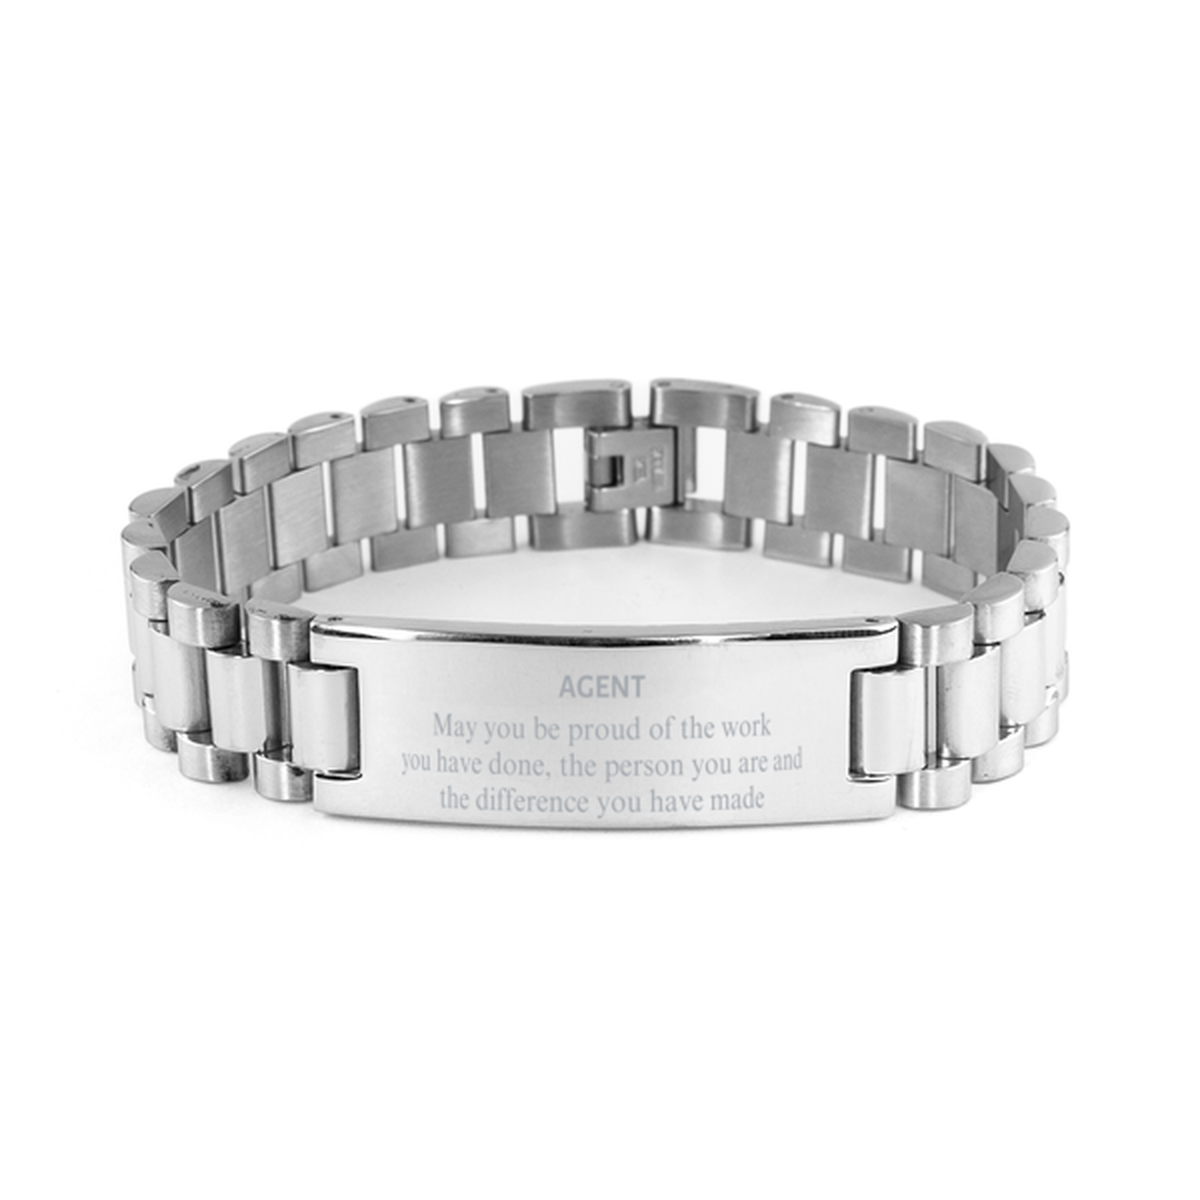 Agent May you be proud of the work you have done, Retirement Agent Ladder Stainless Steel Bracelet for Colleague Appreciation Gifts Amazing for Agent